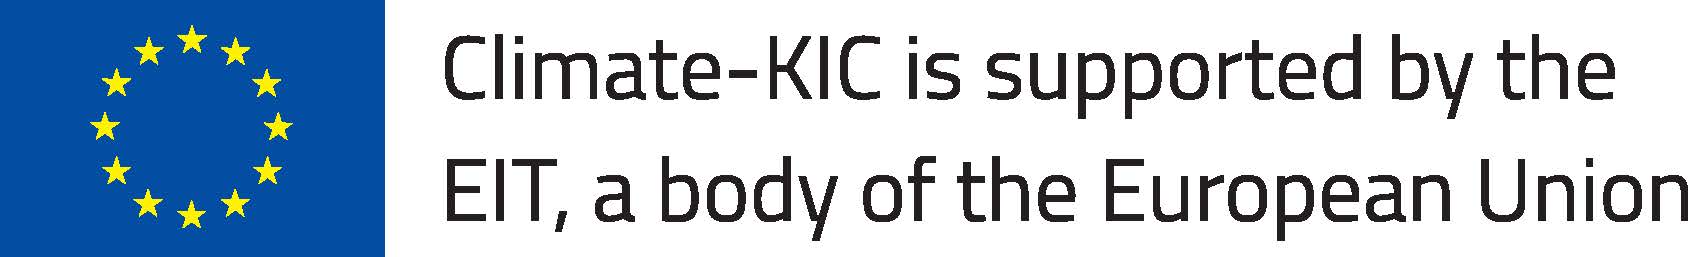 Climate-KIC is supported by the EIT, a body of the European Union